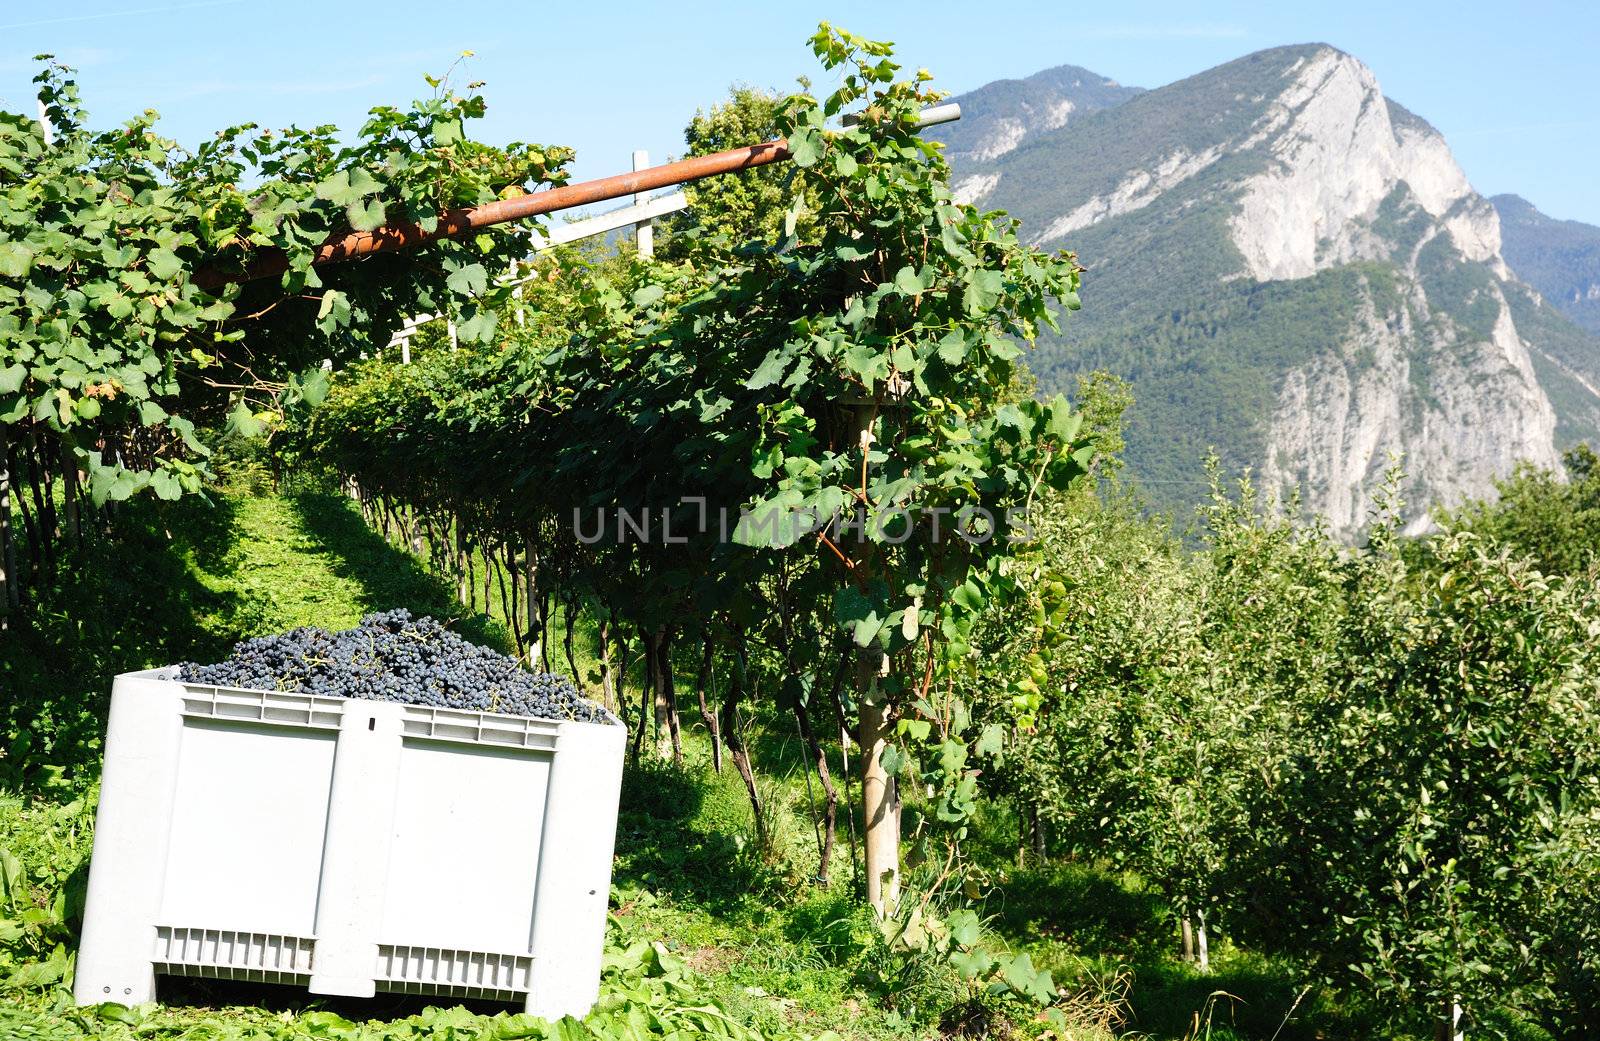 An image of a green vineyard in the mountains